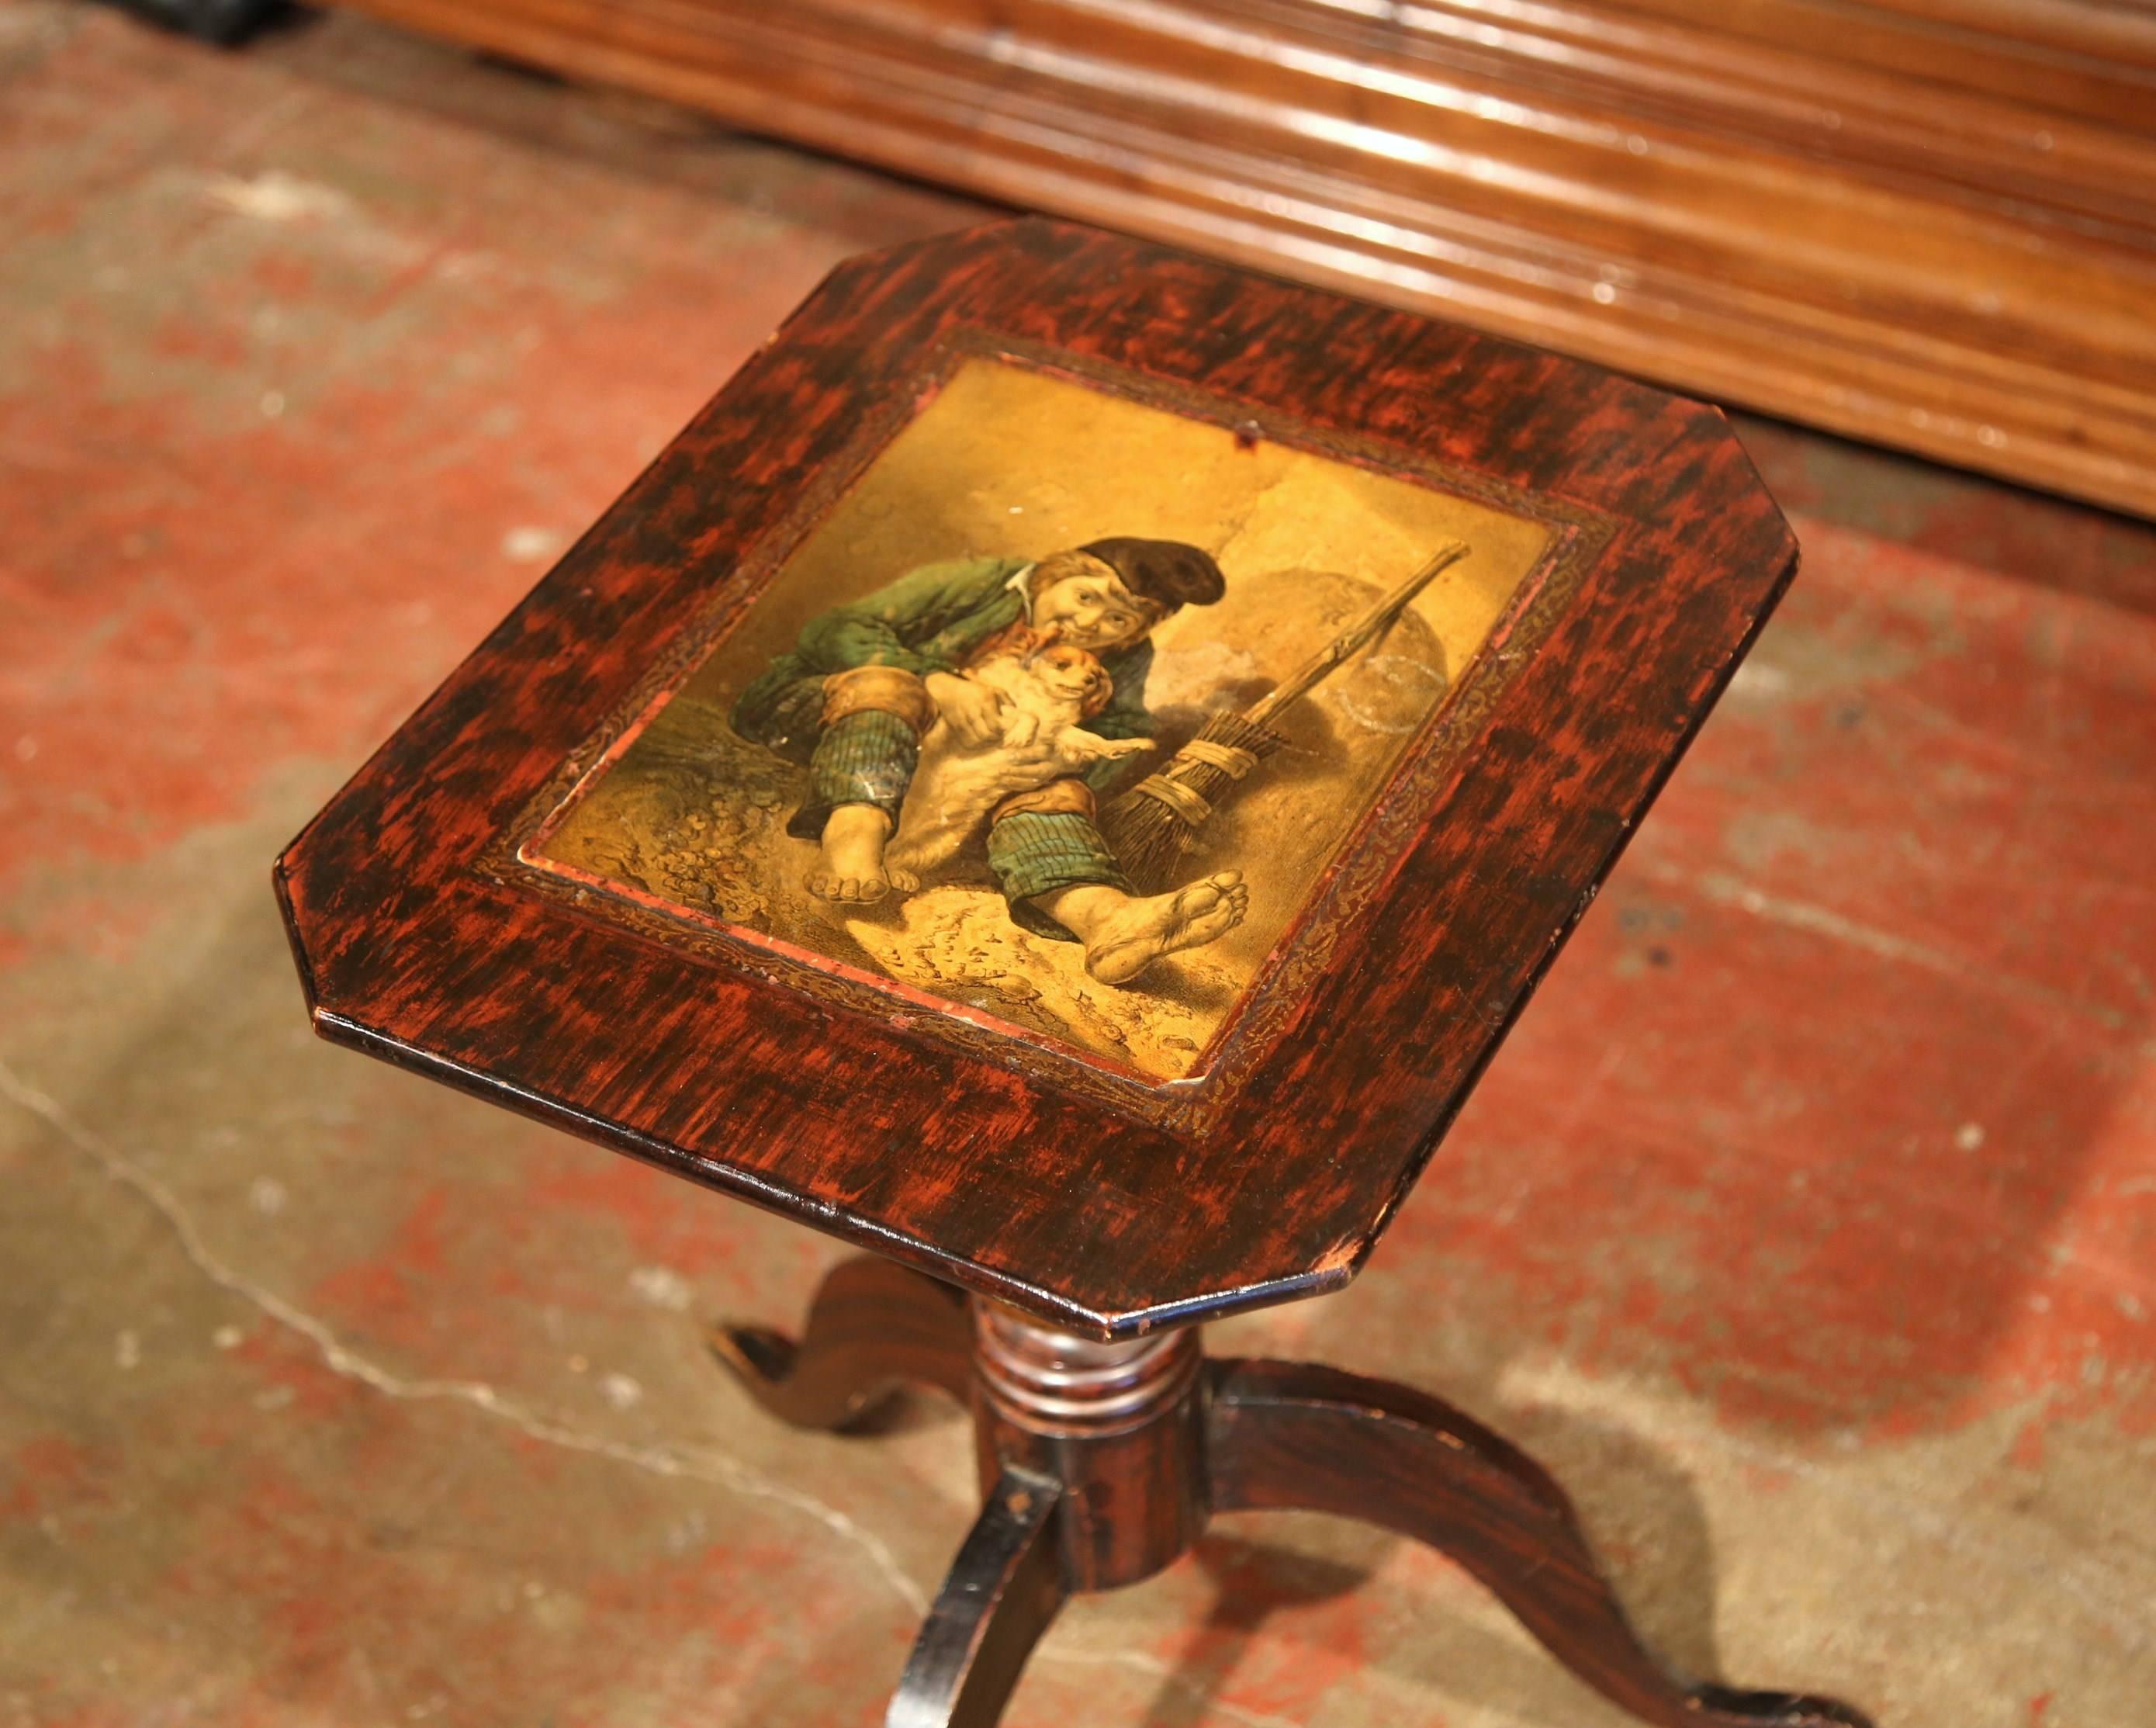 This elegant, rectangular side table was crafted in England, circa 1870. The mahogany pedestal table has angled corners, and the surface features a painted scene of a young boy in 19th century costume playing with his dog. The carved, turned base